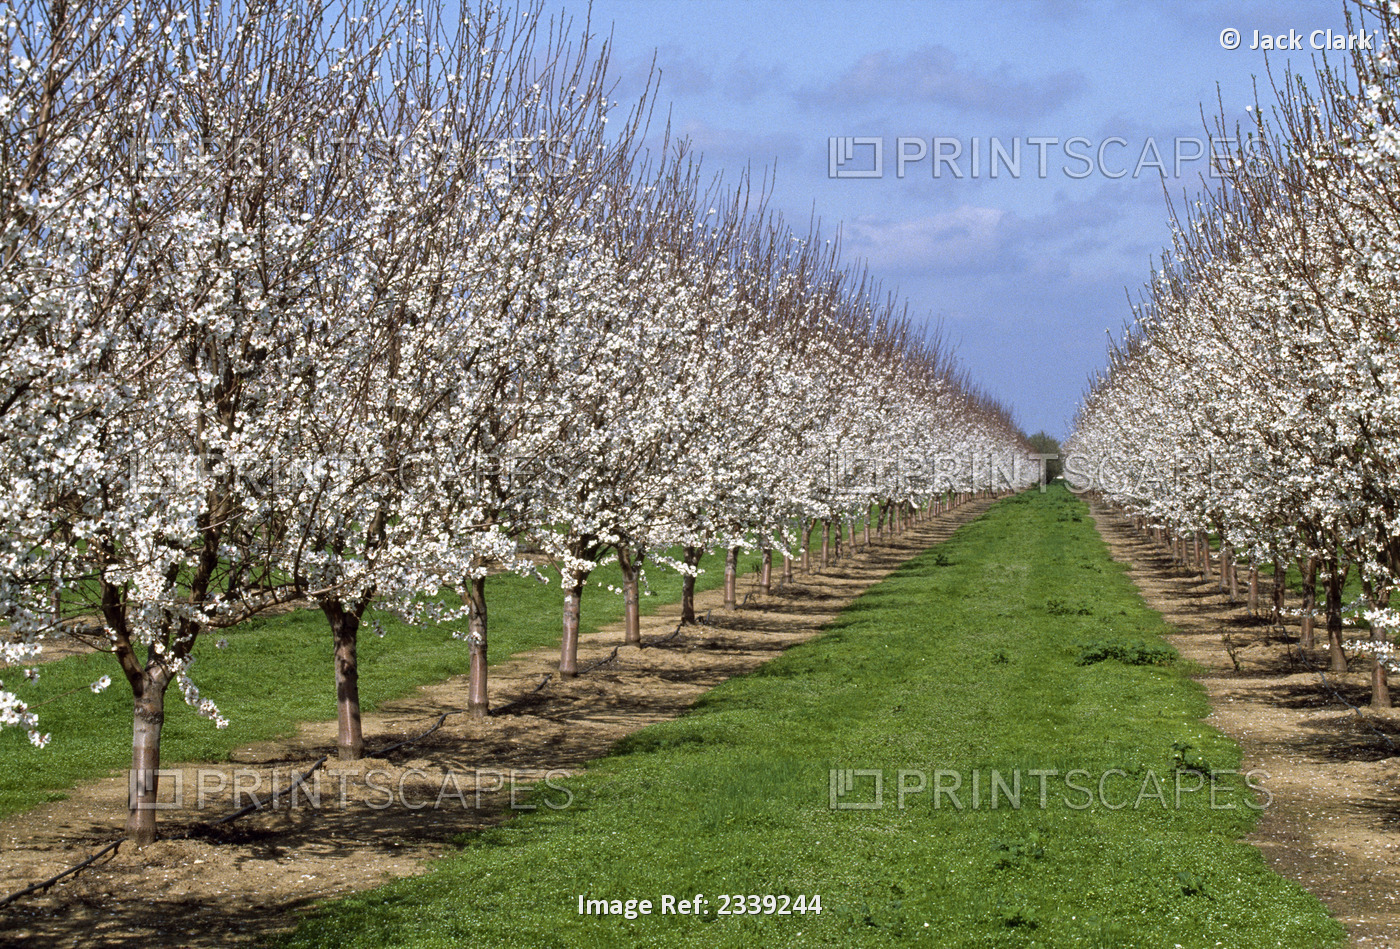 Agriculture - Almond orchard in full bloom / California, USA.